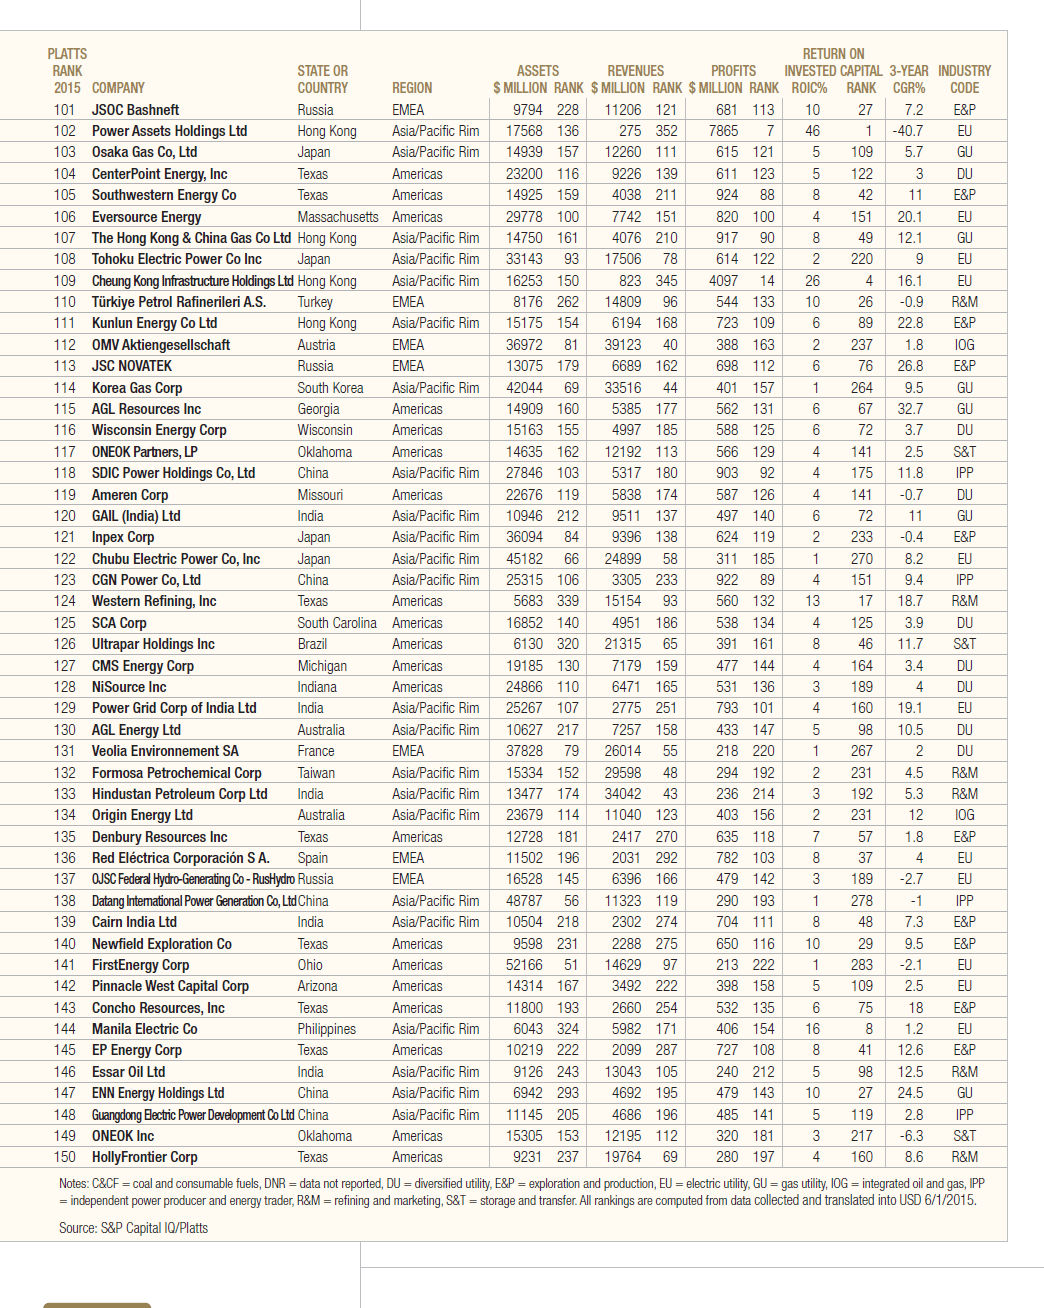 Platts Top 250 Energy Companies for 2015-Page 3